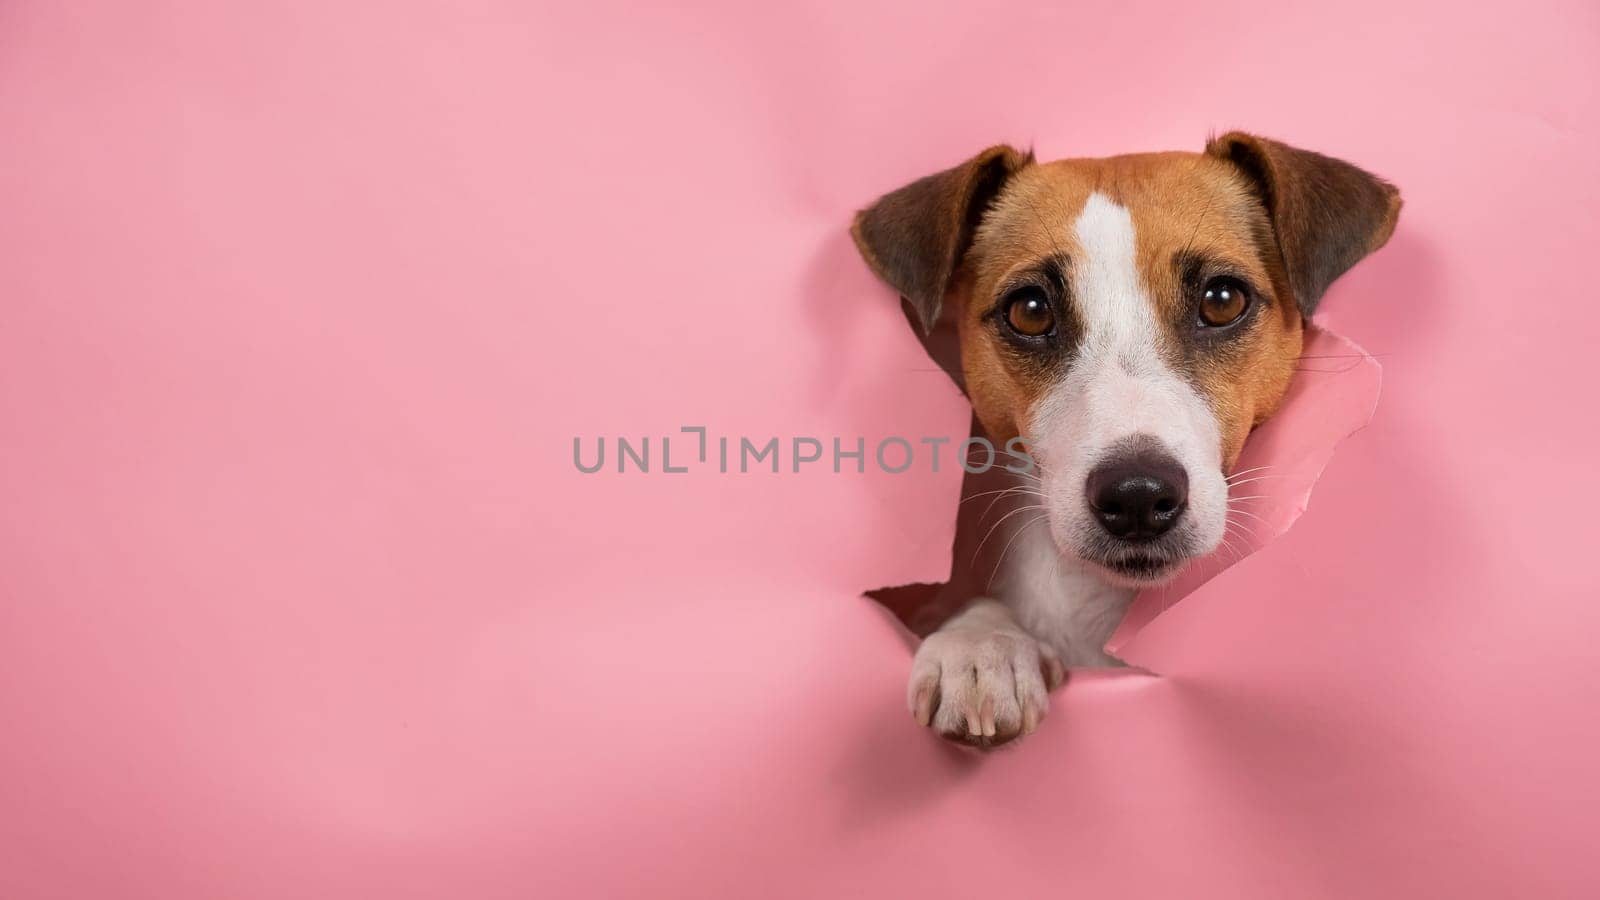 Funny dog jack russell terrier tore pink paper background. by mrwed54